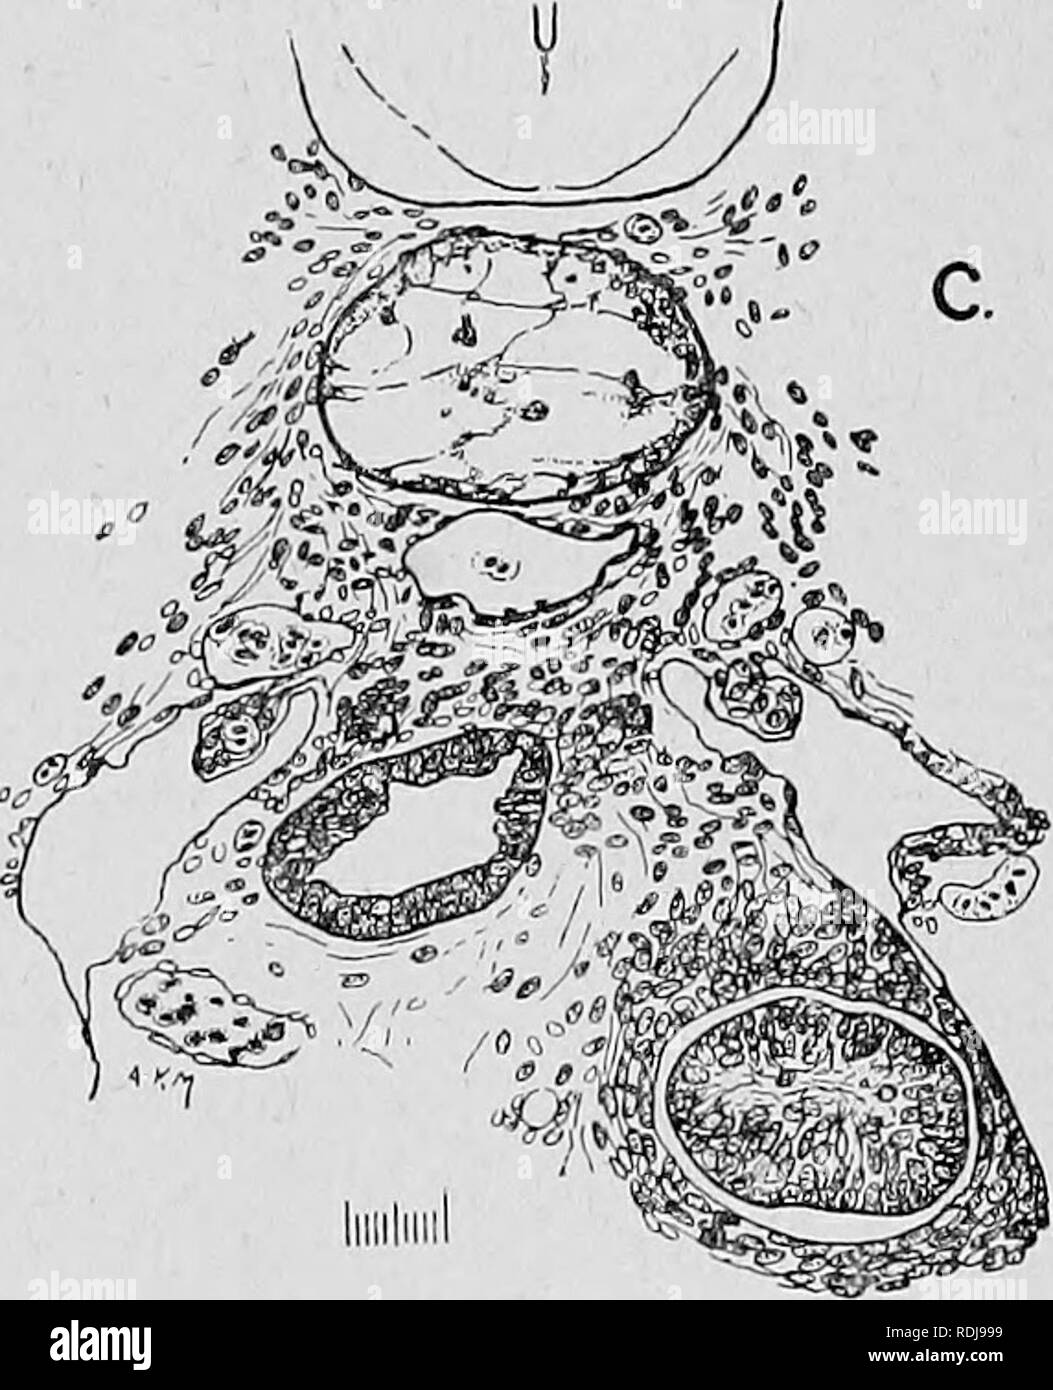 . Text-book of embryology. Embryology. Fig. 97. â Portions of â transverse sections through a Lepidosiren larva (stage 34) to illustrate the changing relations of lung to gut from a short distance behind the glottis tailwards. In A the lung is ventral to the alimentary canal; in B it is directly to the right; in C it has become displaced dorsally ; while in D (where it is commencing to bifurcate) it has come to be mid-dorsal in position. A, aorta; gl, glomerulus of pronephros; I, lung; N, notochord; oes, oesophagus. hinder end of the rudiment, which will give rise to the lungs in the restricte Stock Photo